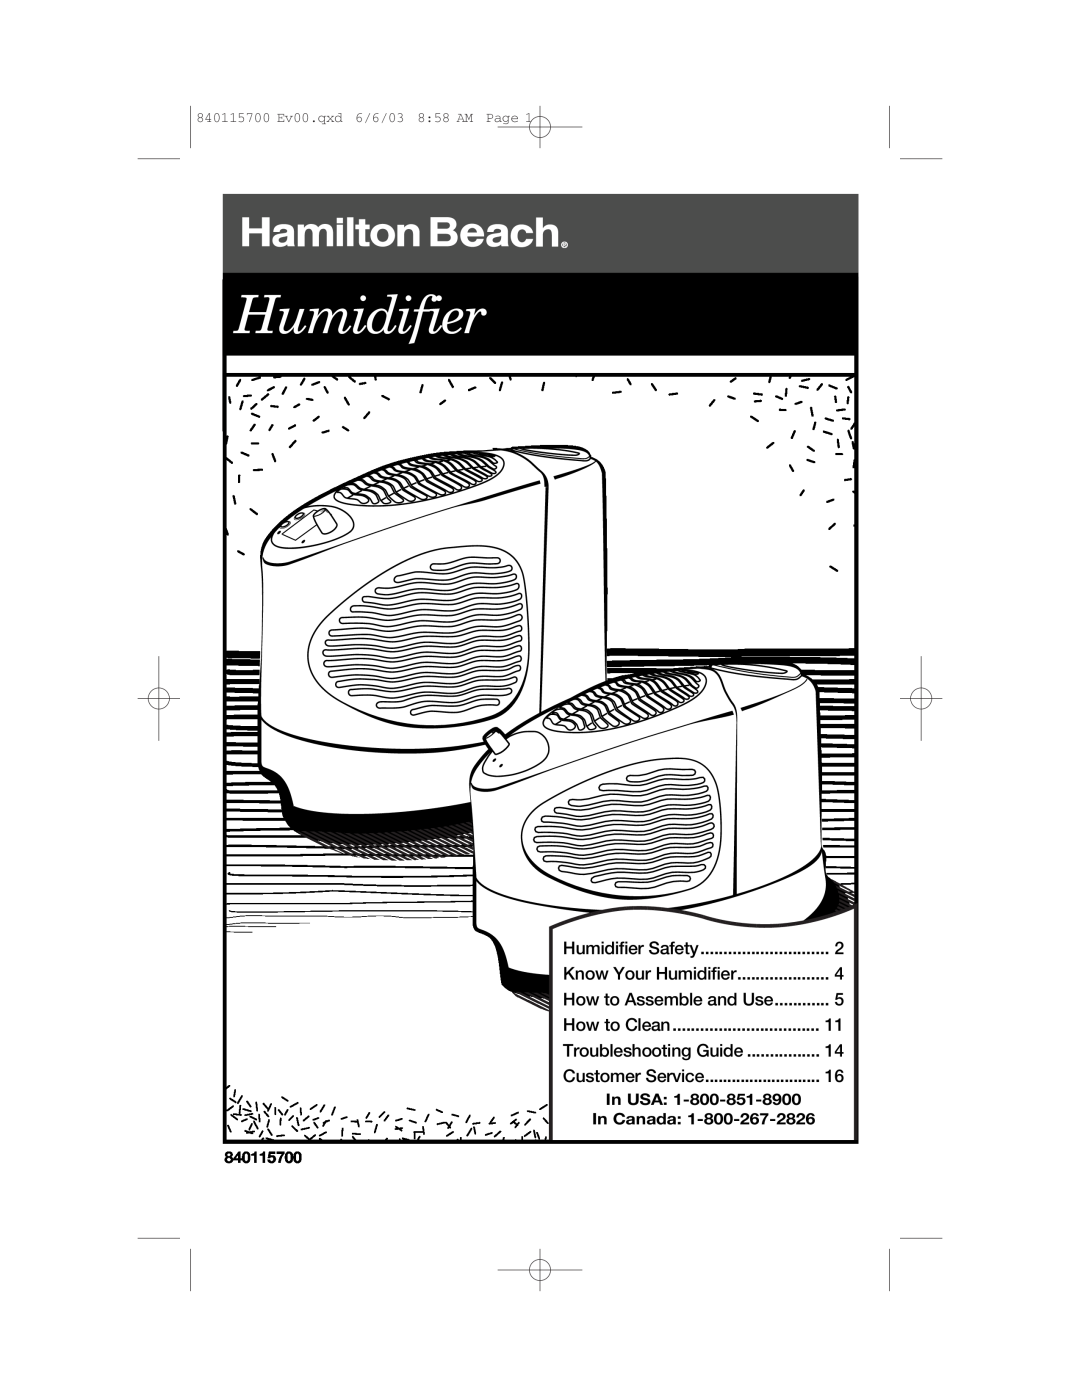 Hamilton Beach 05518C manual Humidifier, Troubleshooting Guide, In USA, In Canada, 840115700 Ev00.qxd 6/6/03 8 58 AM Page 